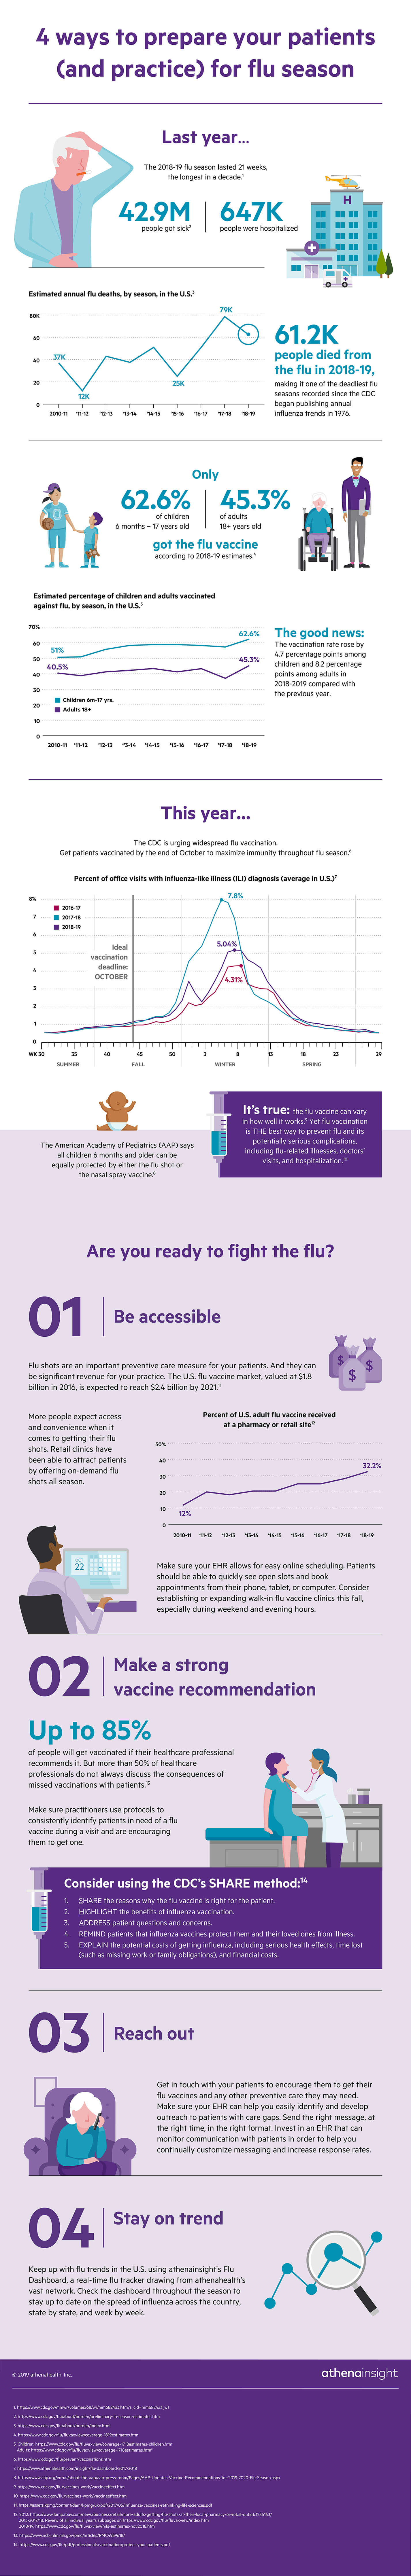 athenahealth Infographic Data 4 Ways to Prepare Patients & Practices for Flu Season